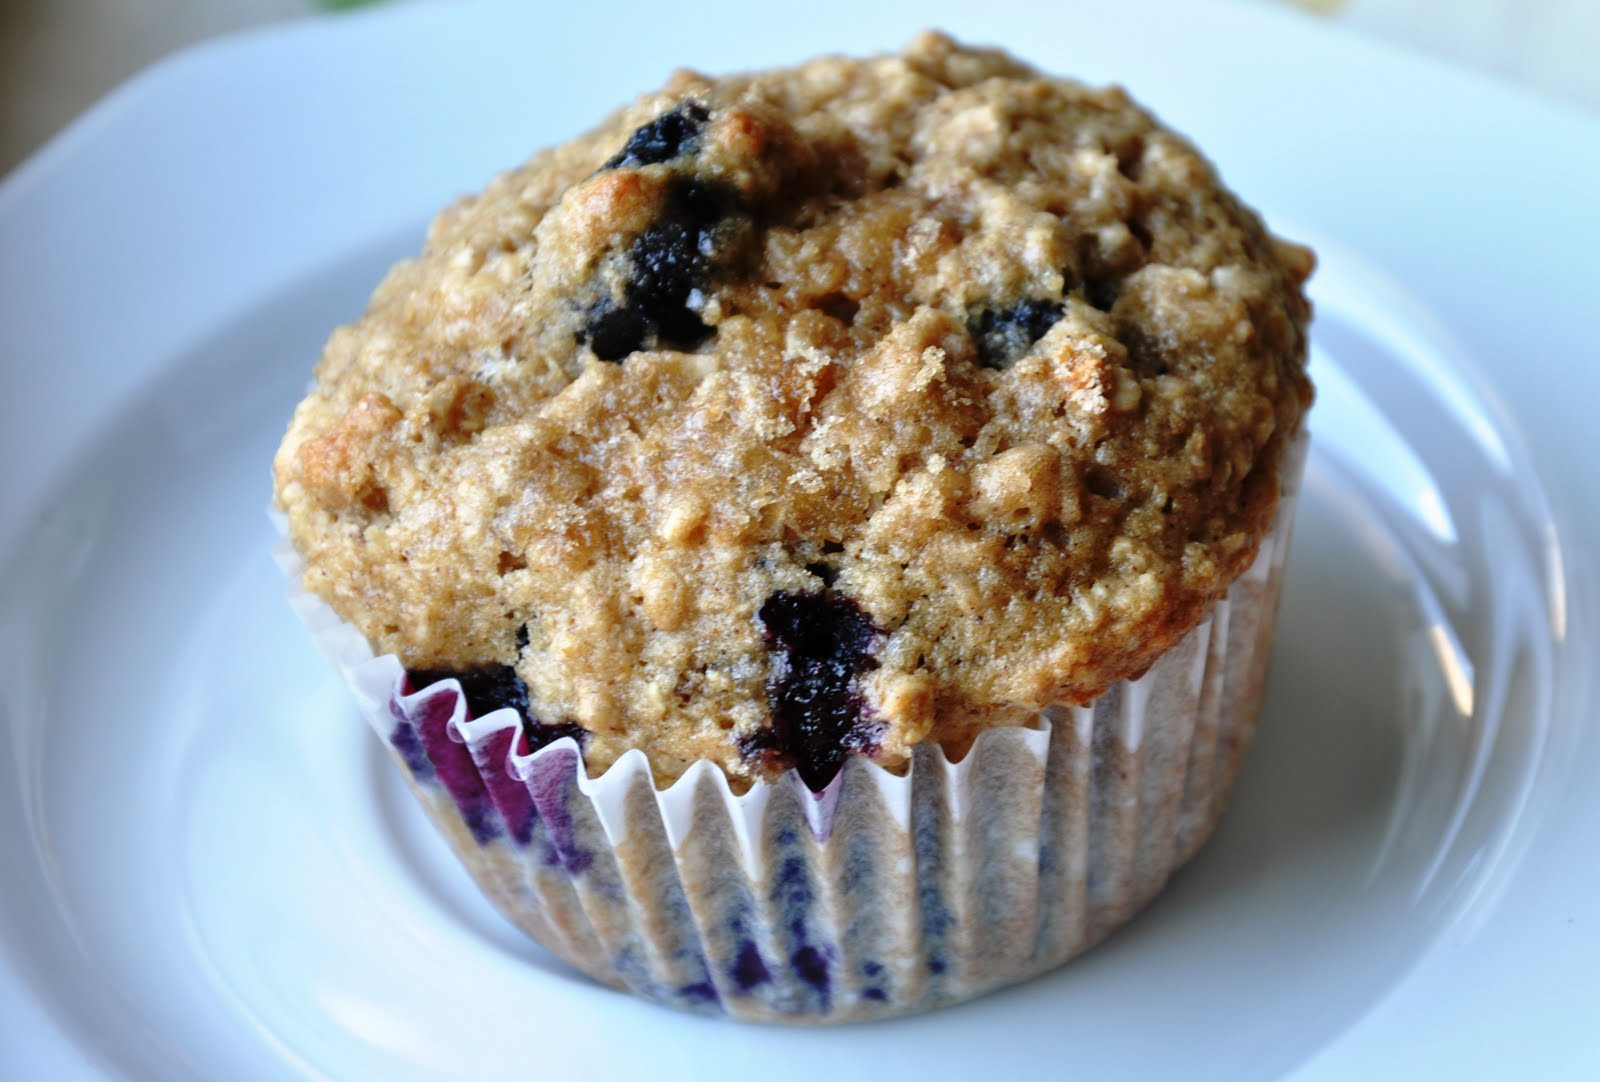 Healthy Blueberry Oatmeal Muffins With Applesauce
 Oatmeal Blueberry Applesauce Muffins 151 Calories & LOW